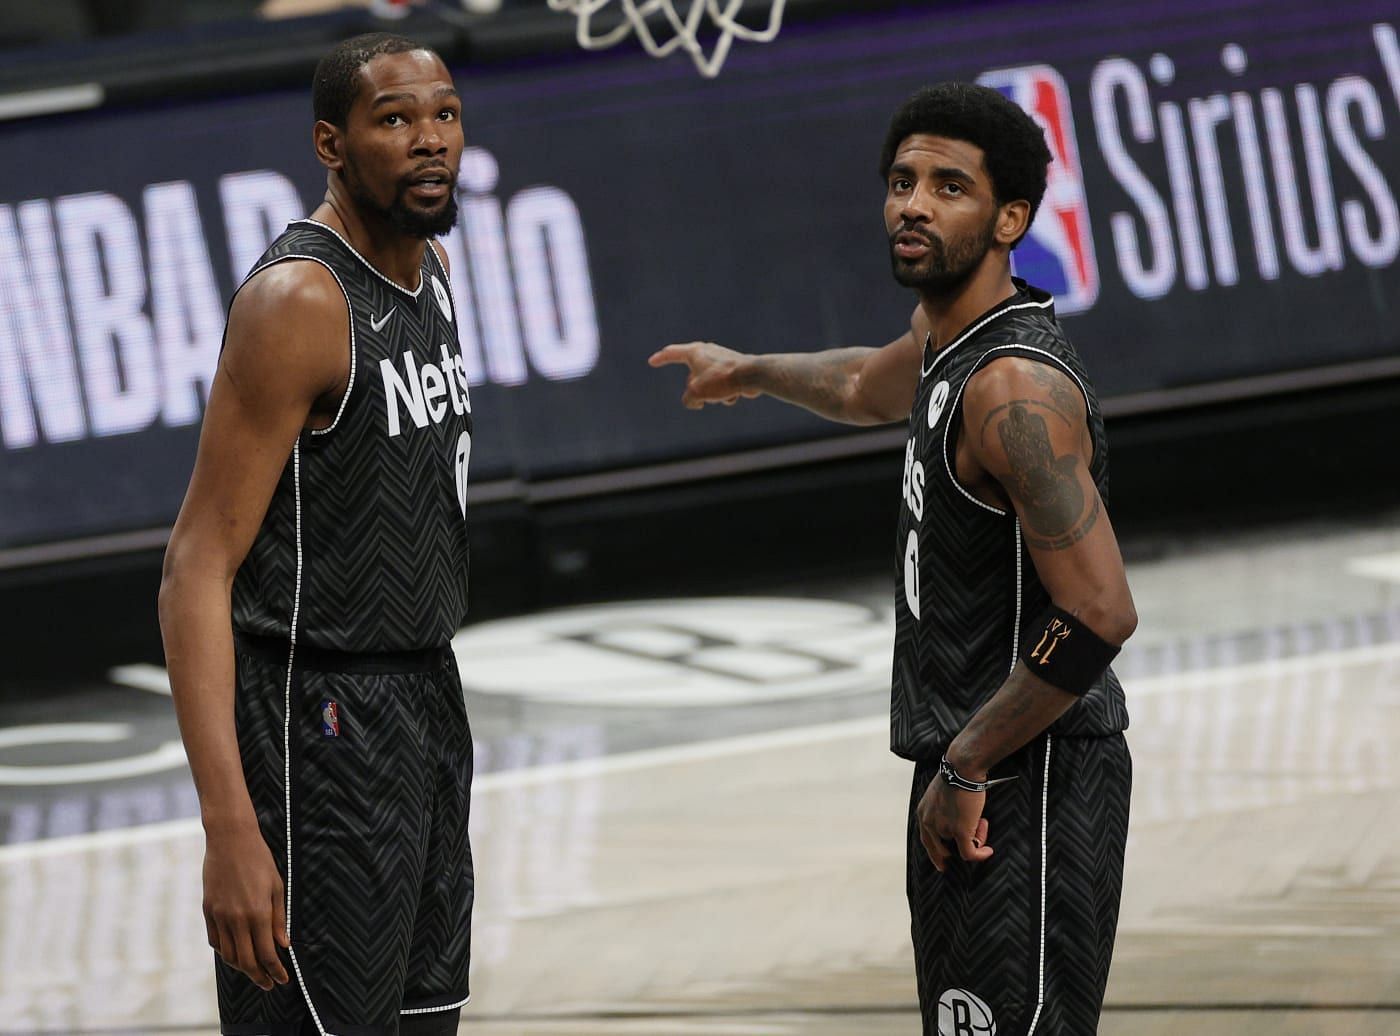 The Kyrie Irving and Kevin Durant partnership in Brooklyn is about to come to a spectacular end. [Photo: Complex]